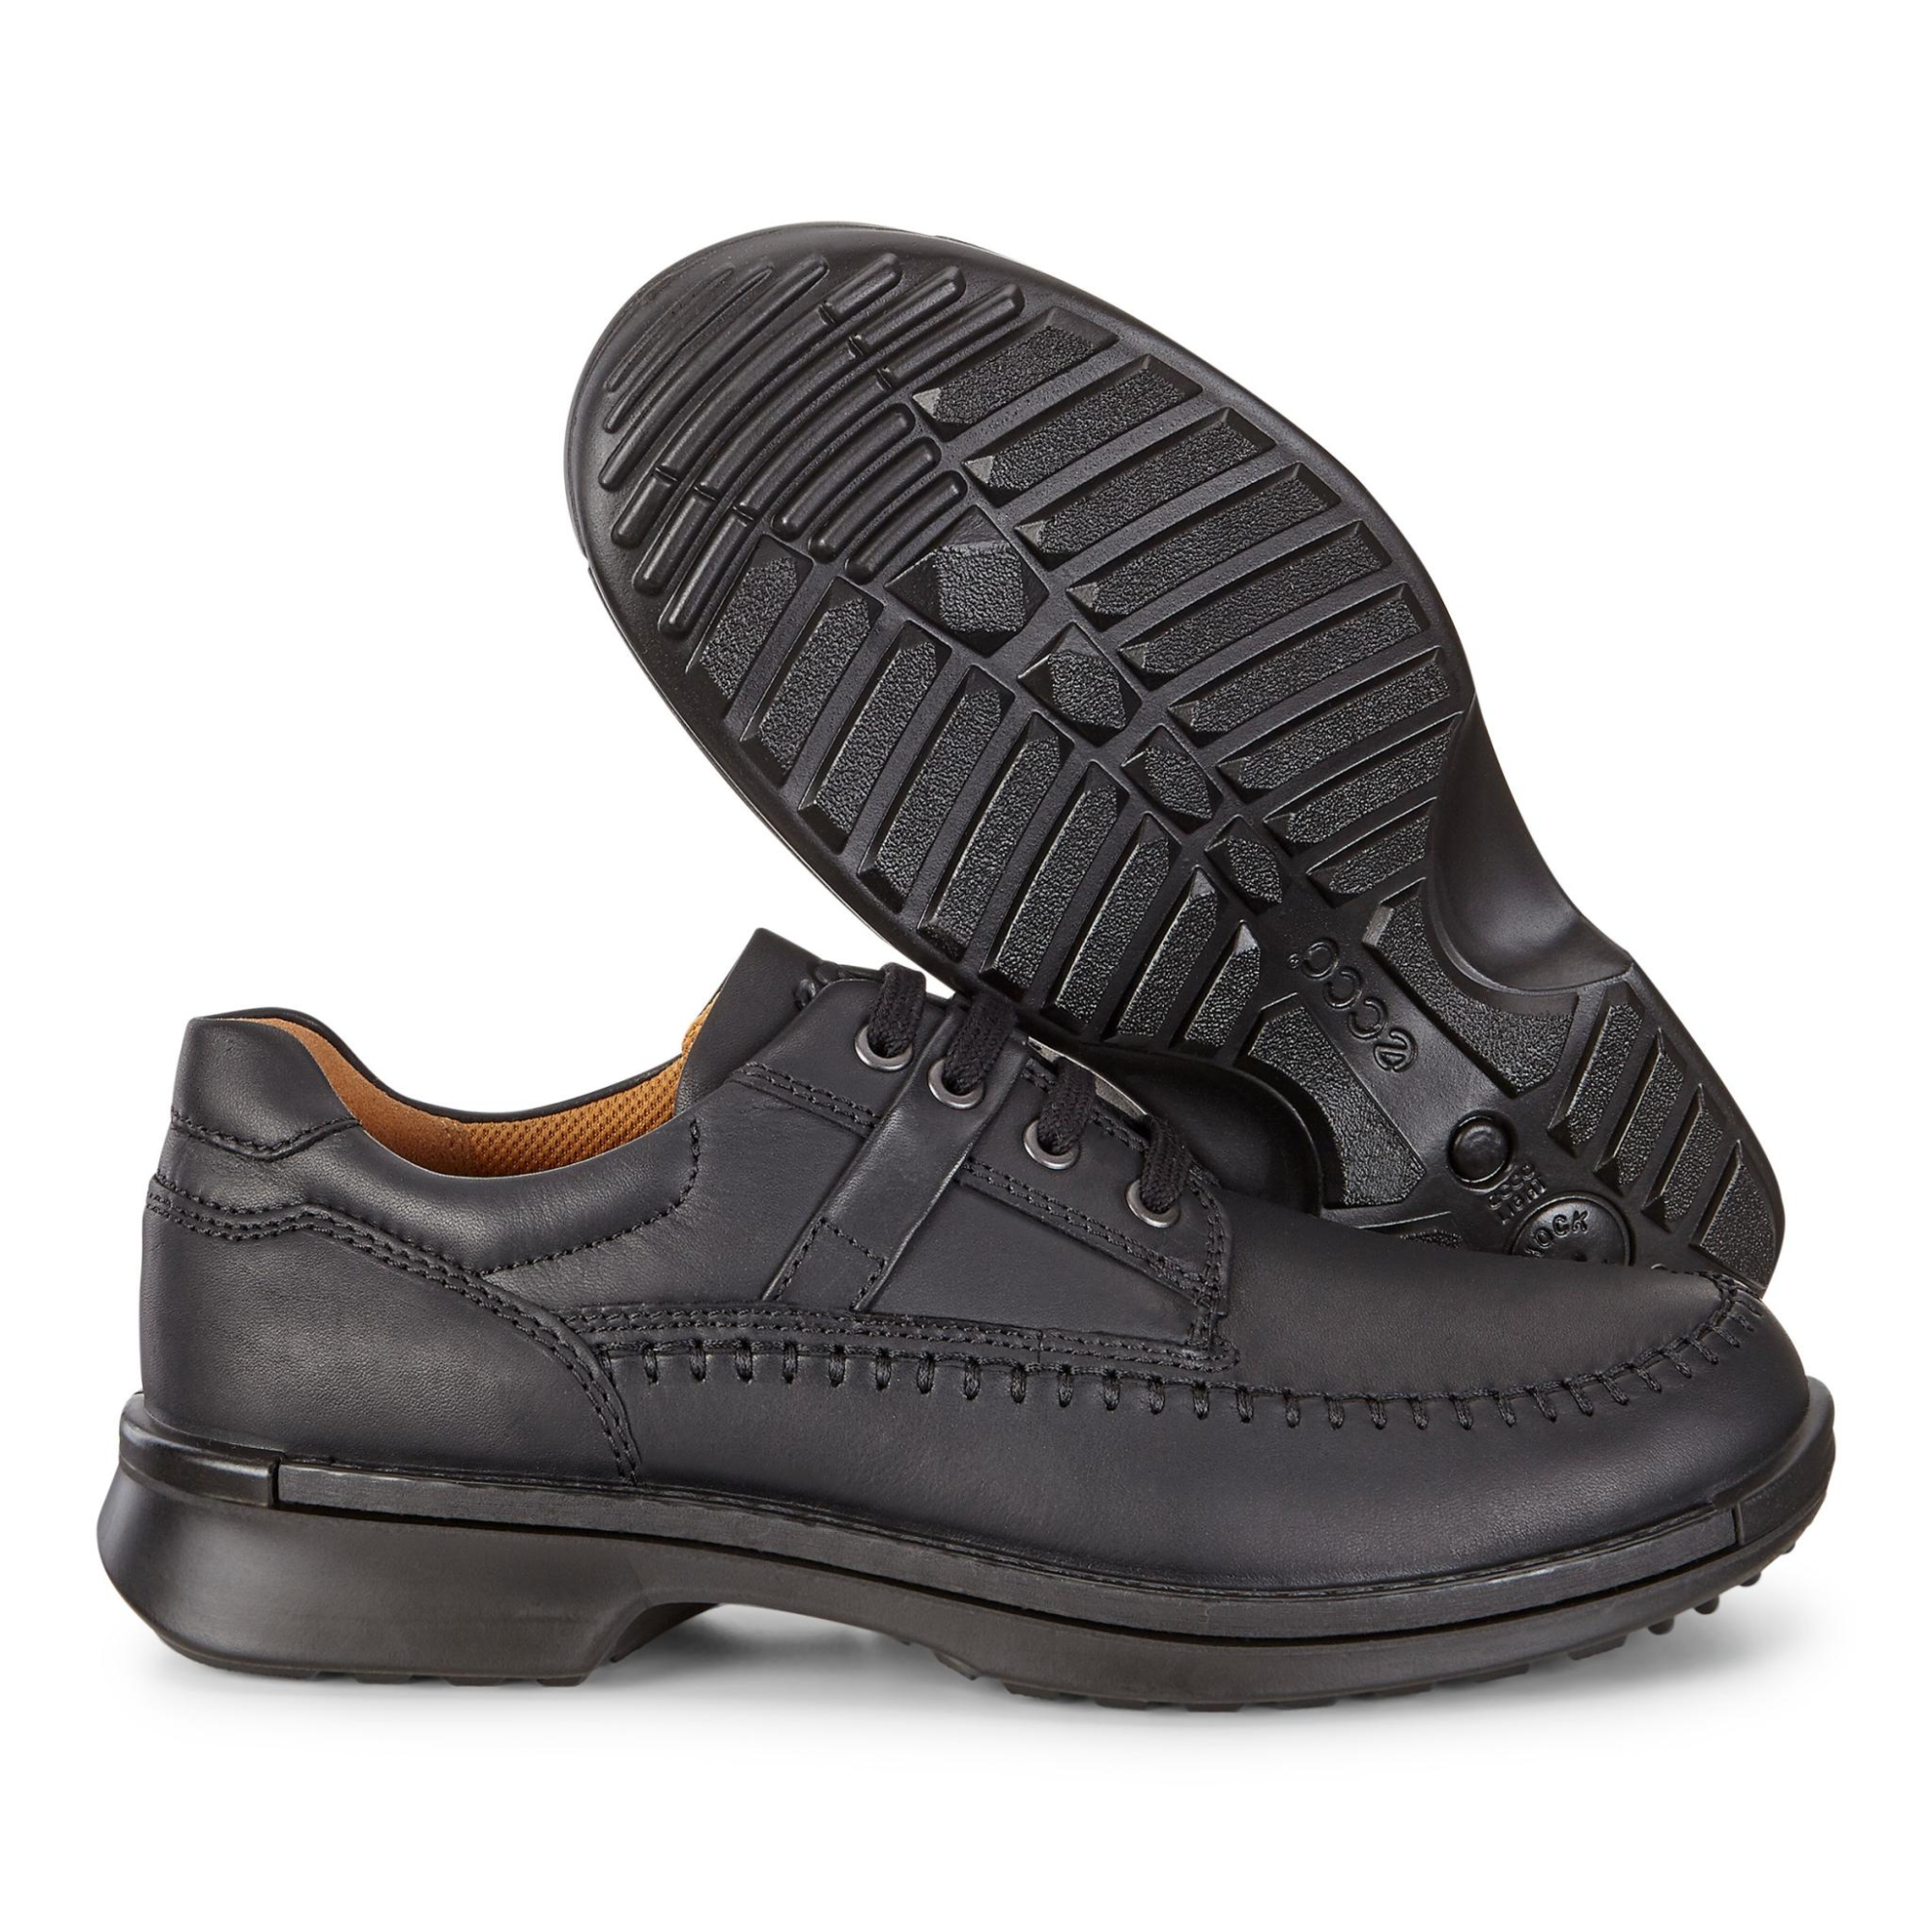 tobak nyhed elskerinde Ecco Fusion II Moc Toe Tie 39 - Products - Veryk Mall - Veryk Mall, many  product, quick response, safe your money!